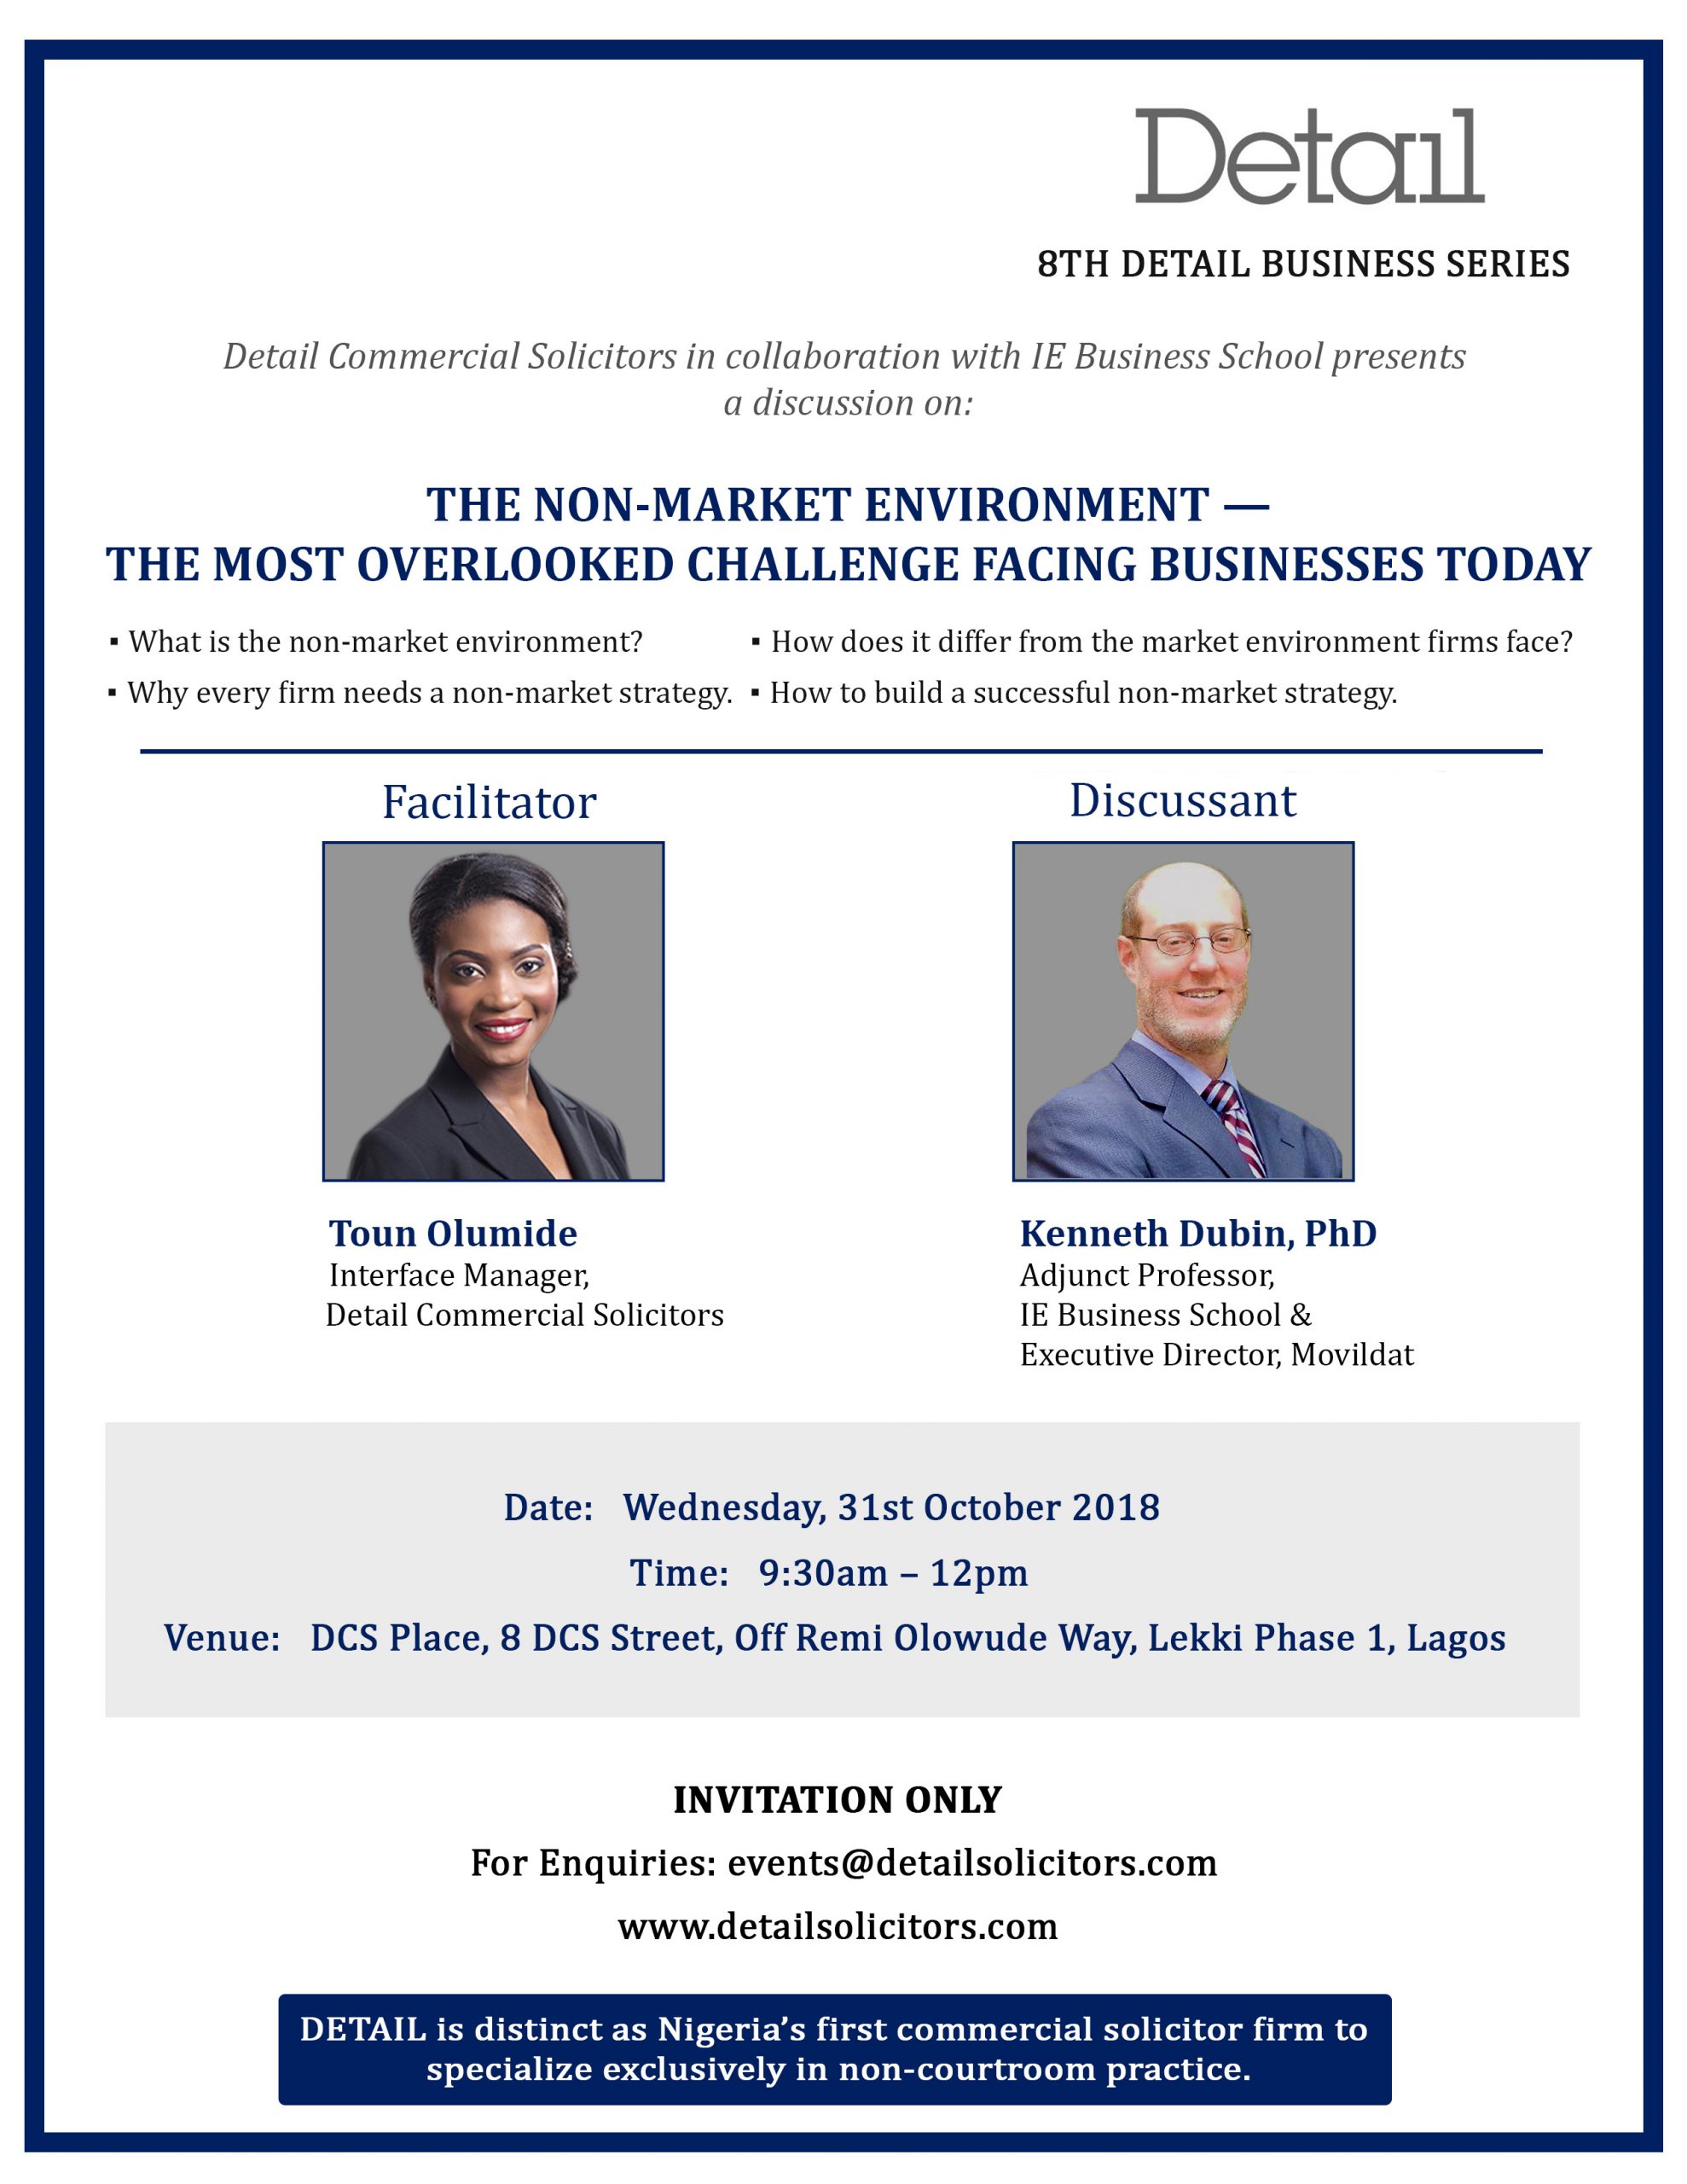 DETAIL TO HOST THE 8TH DETAIL BUSINESS SERIES ON “THE NON-MARKET ENVIRONMENT – THE MOST OVERLOOKED CHALLENGE FACING BUSINESSES TODAY.”